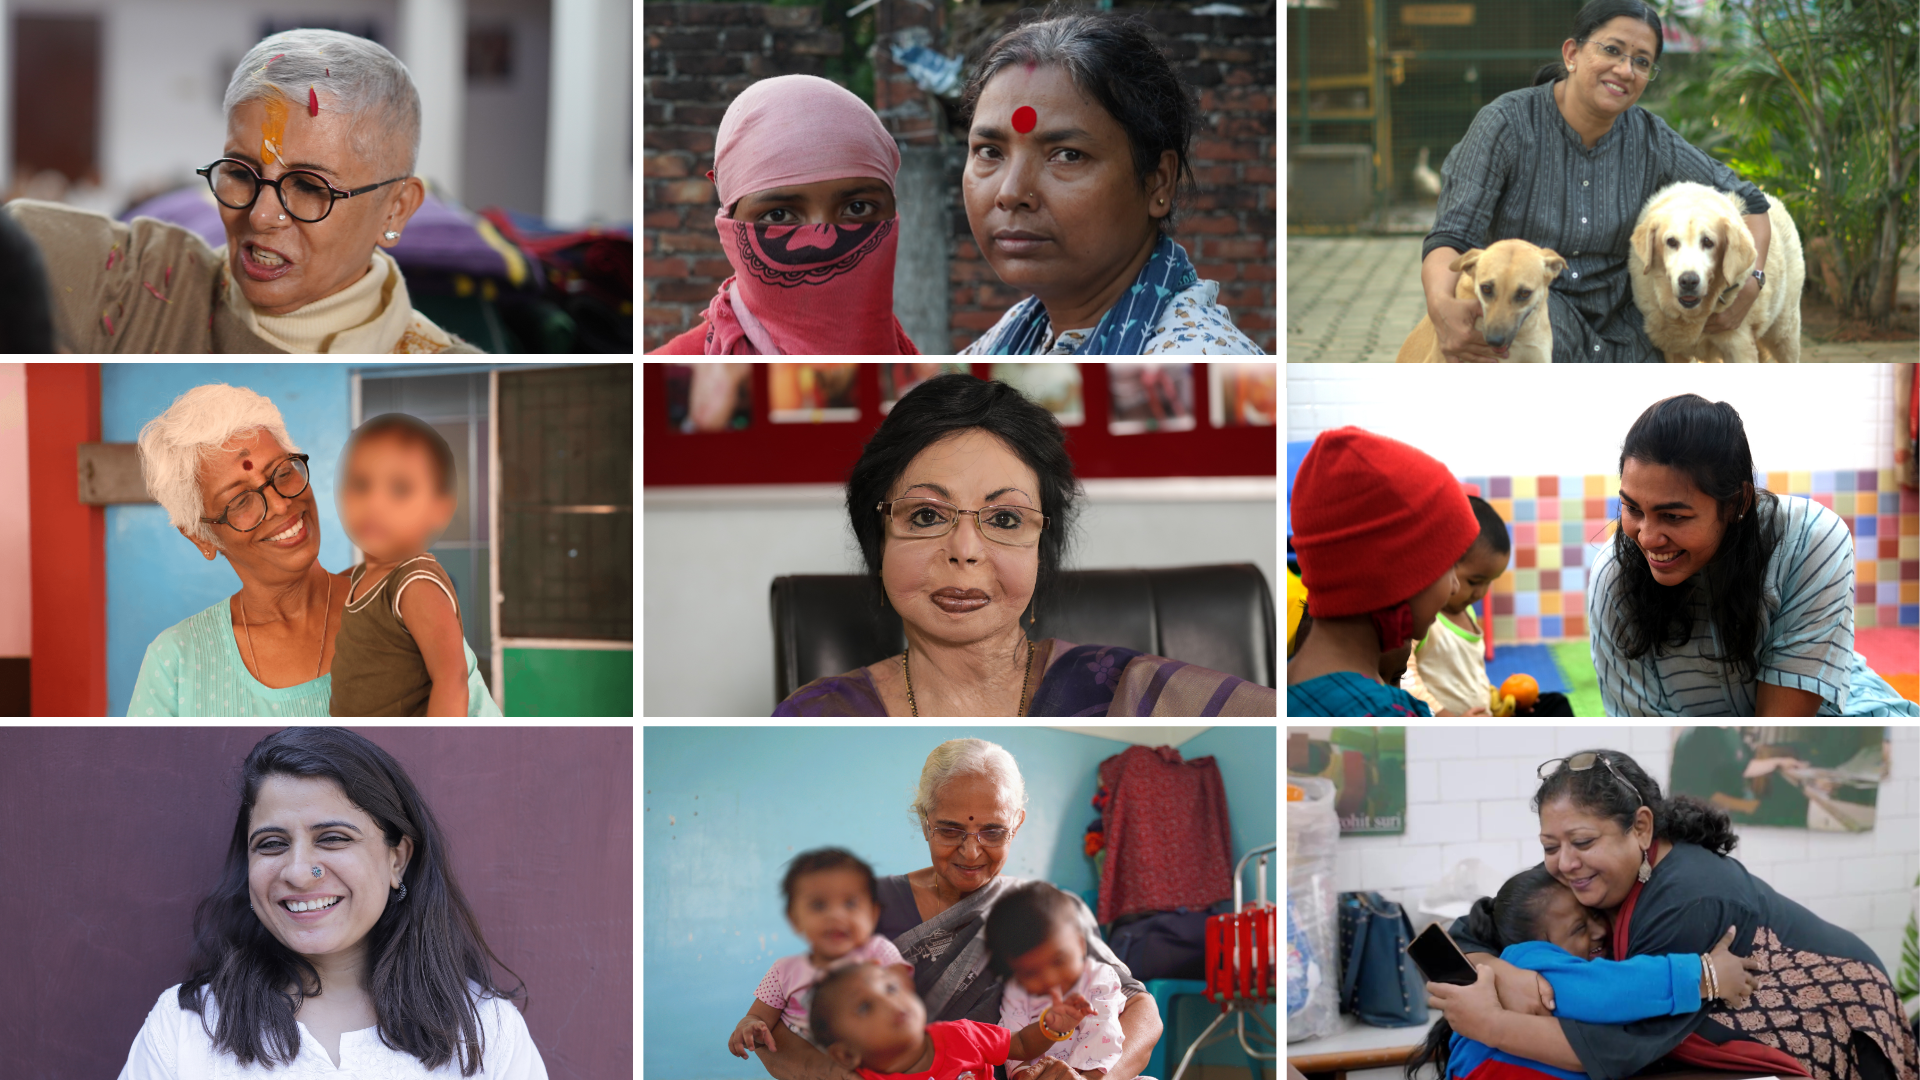 Let's celebrate the strength, resilience, and achievements of women NGO leaders on International Women's Day